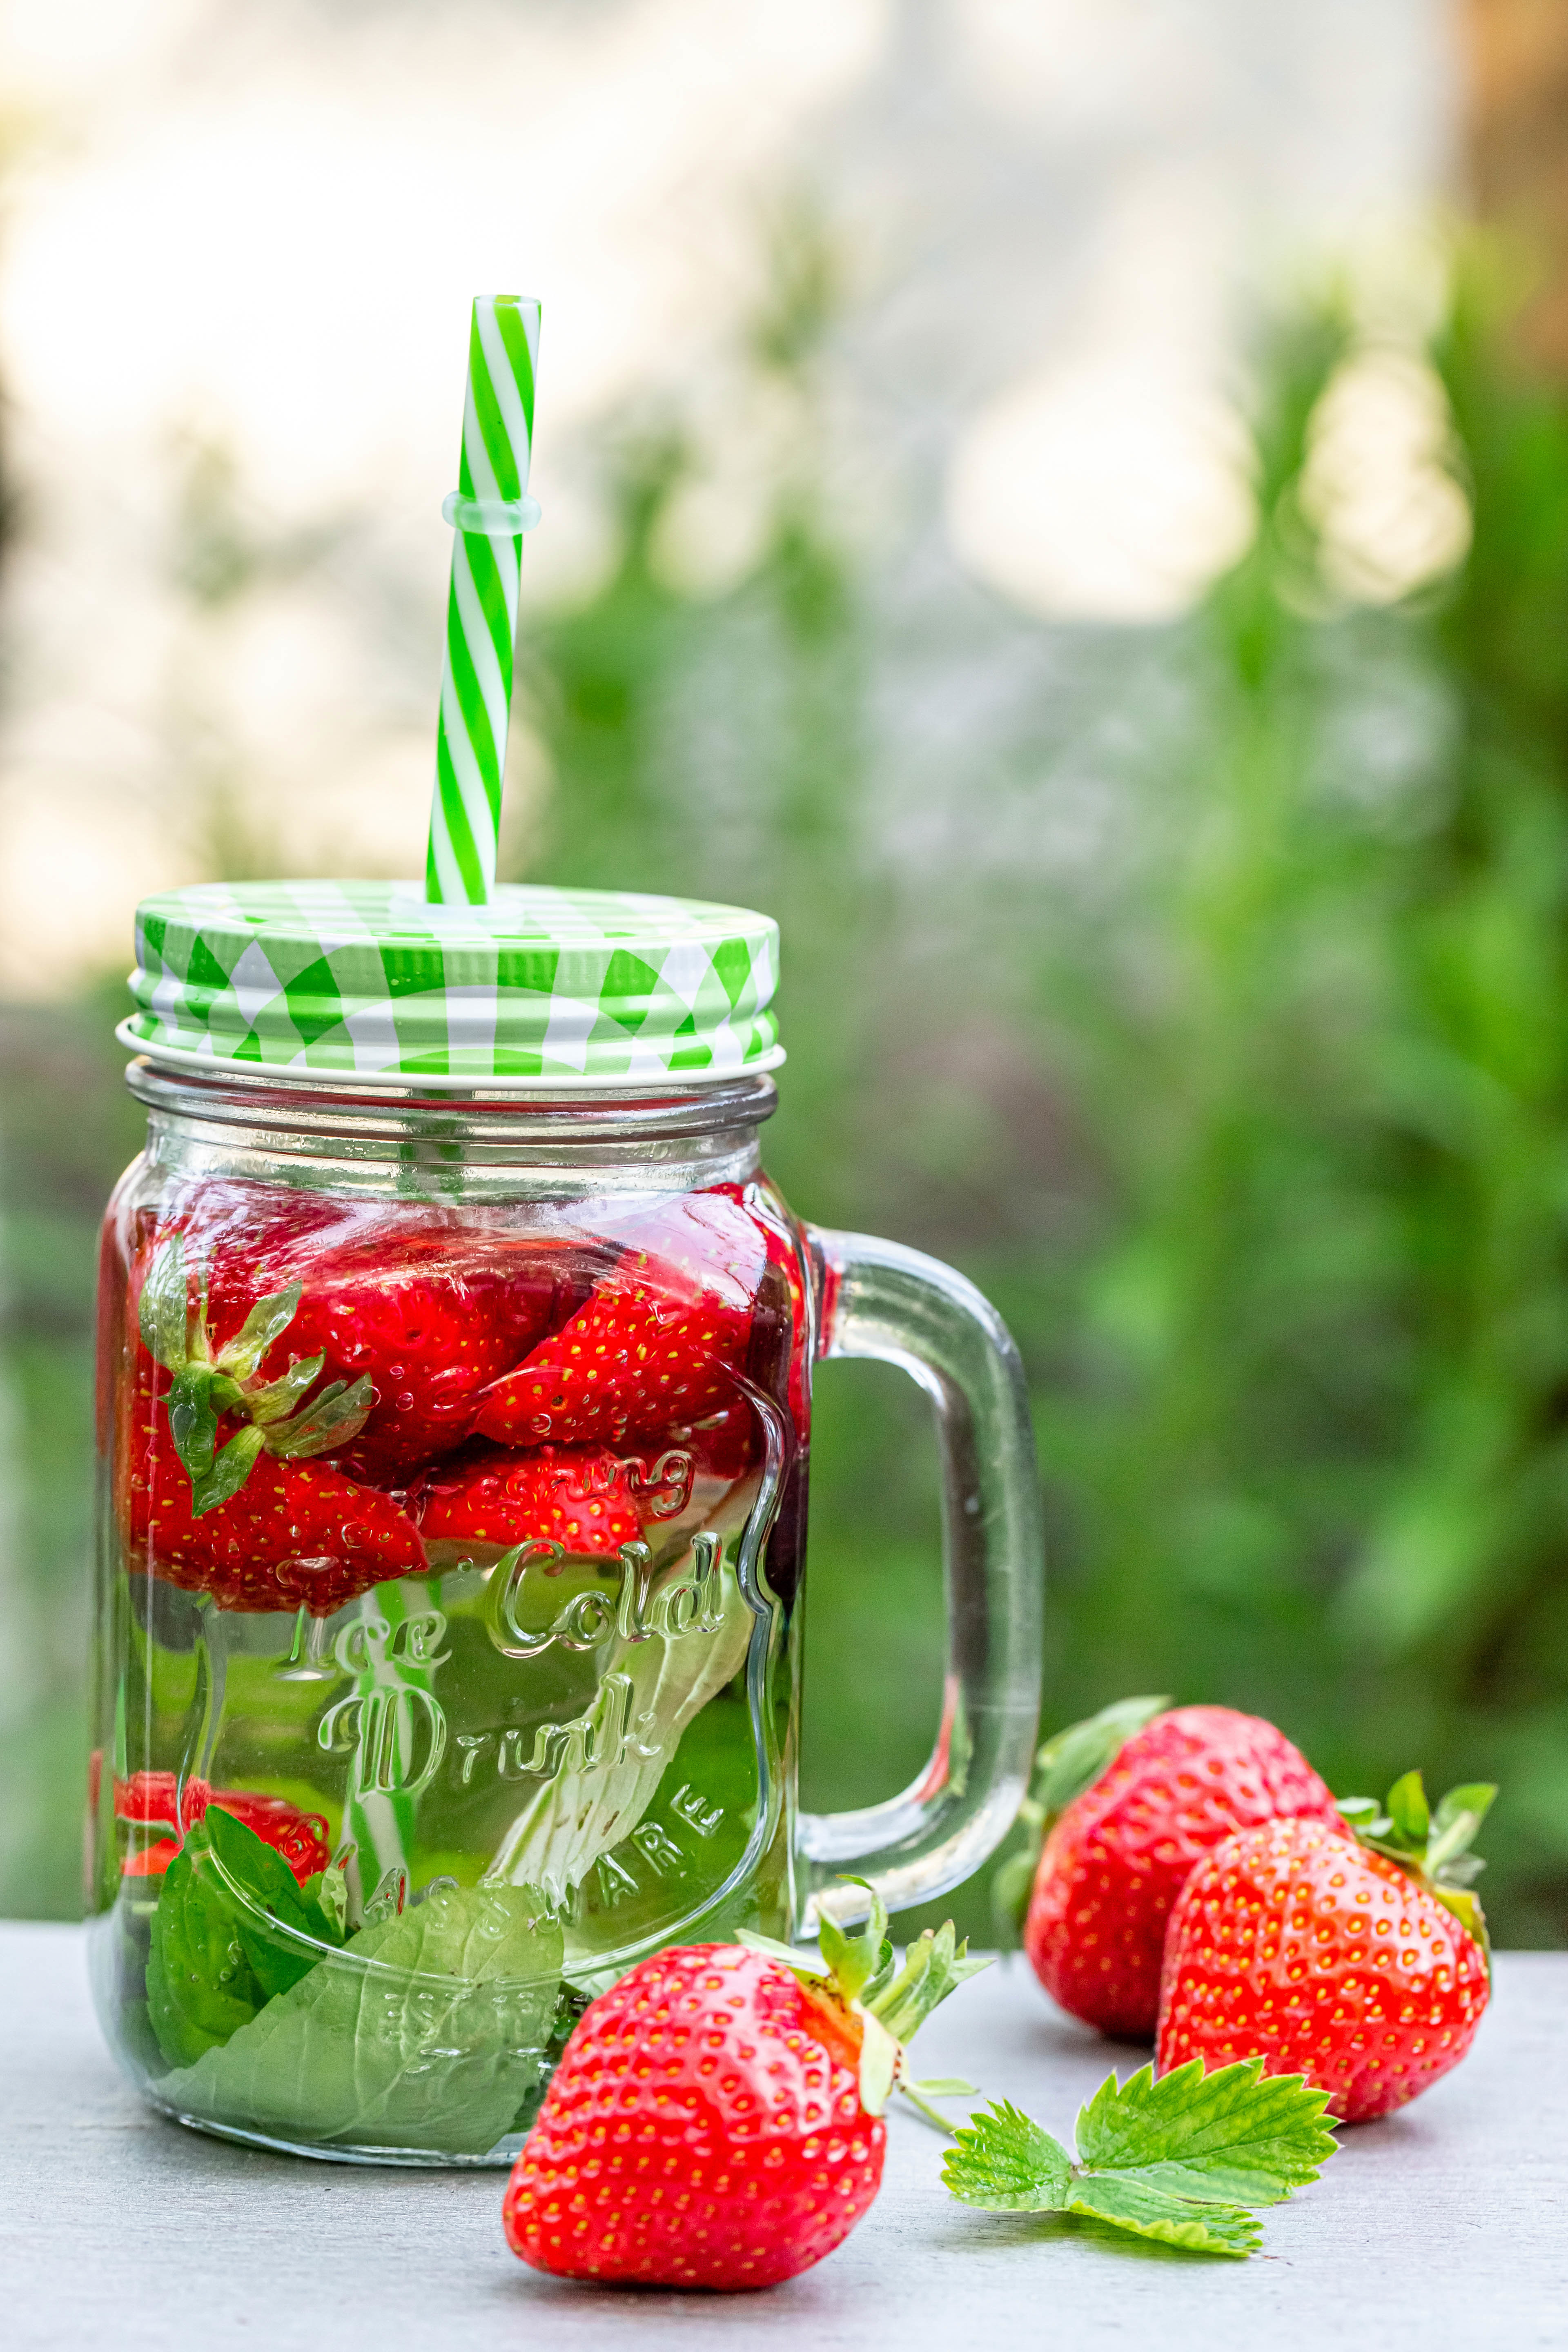 129533 free wallpaper 1080x2400 for phone, download images strawberry, berry, food, mug 1080x2400 for mobile